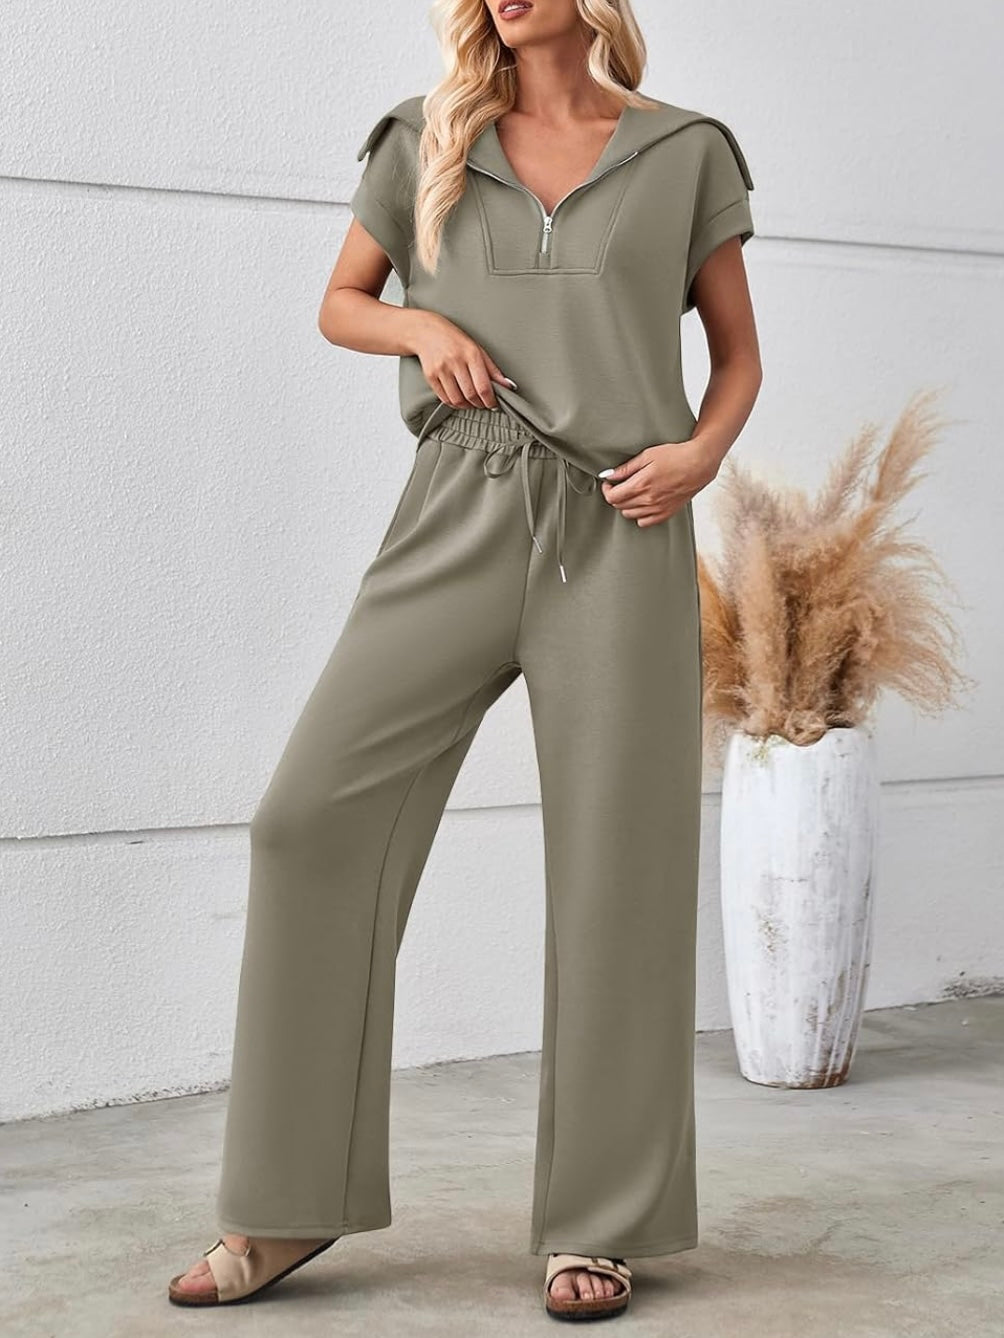 Grey green set of 2. Top and wide pants